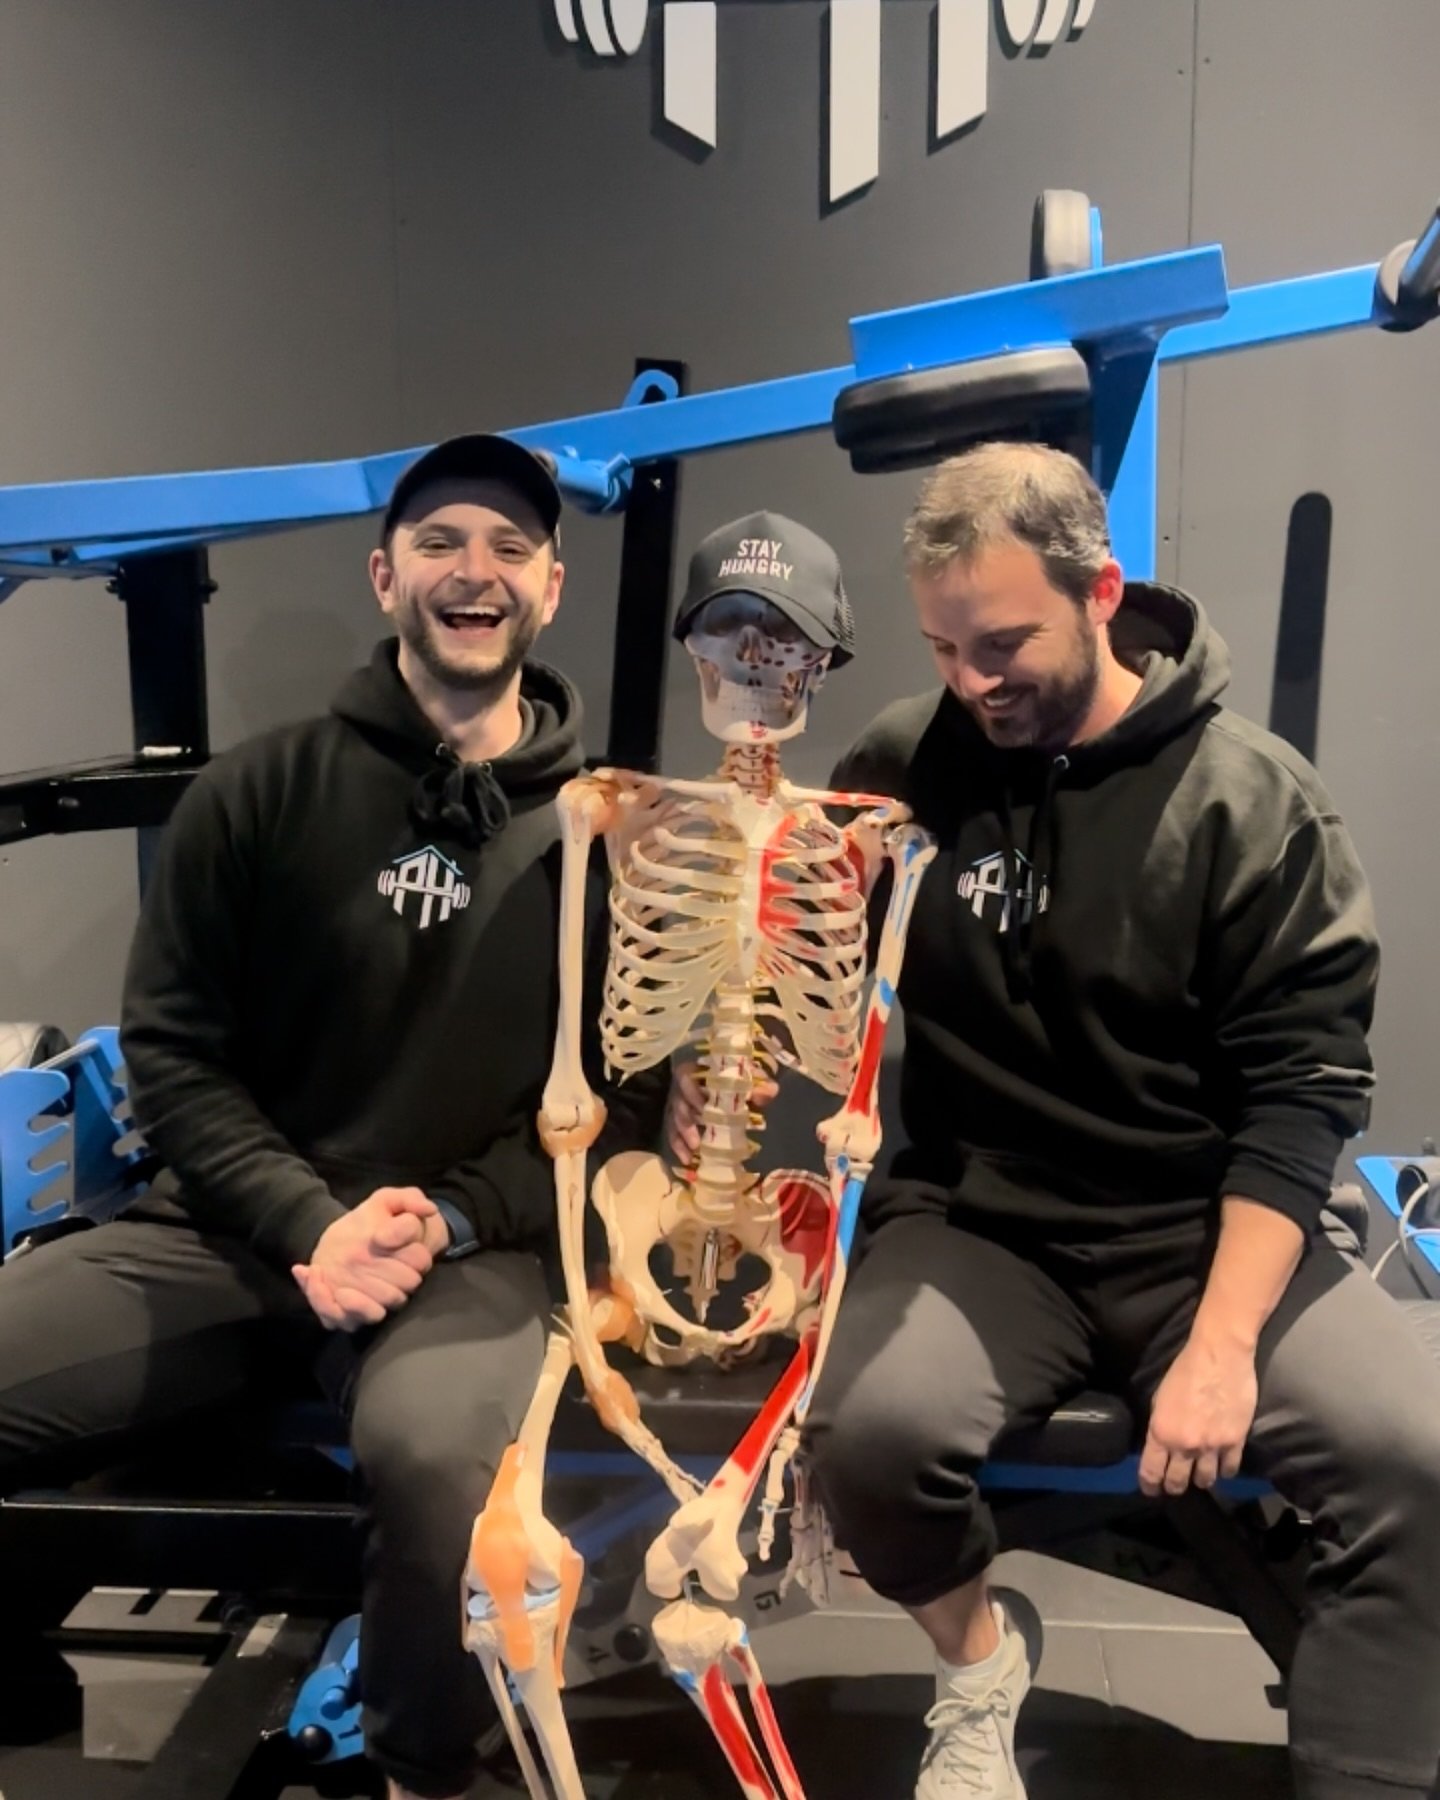 New Team Member Announcement 📣 

Meet Bony Hawk 🛹 🦴 

Bony is a valuable team member at Performance House, he can sometimes be a bit bone idle, but we forgive him 😂

We have the skeleton in the gym for a few reasons but the main reason is that it